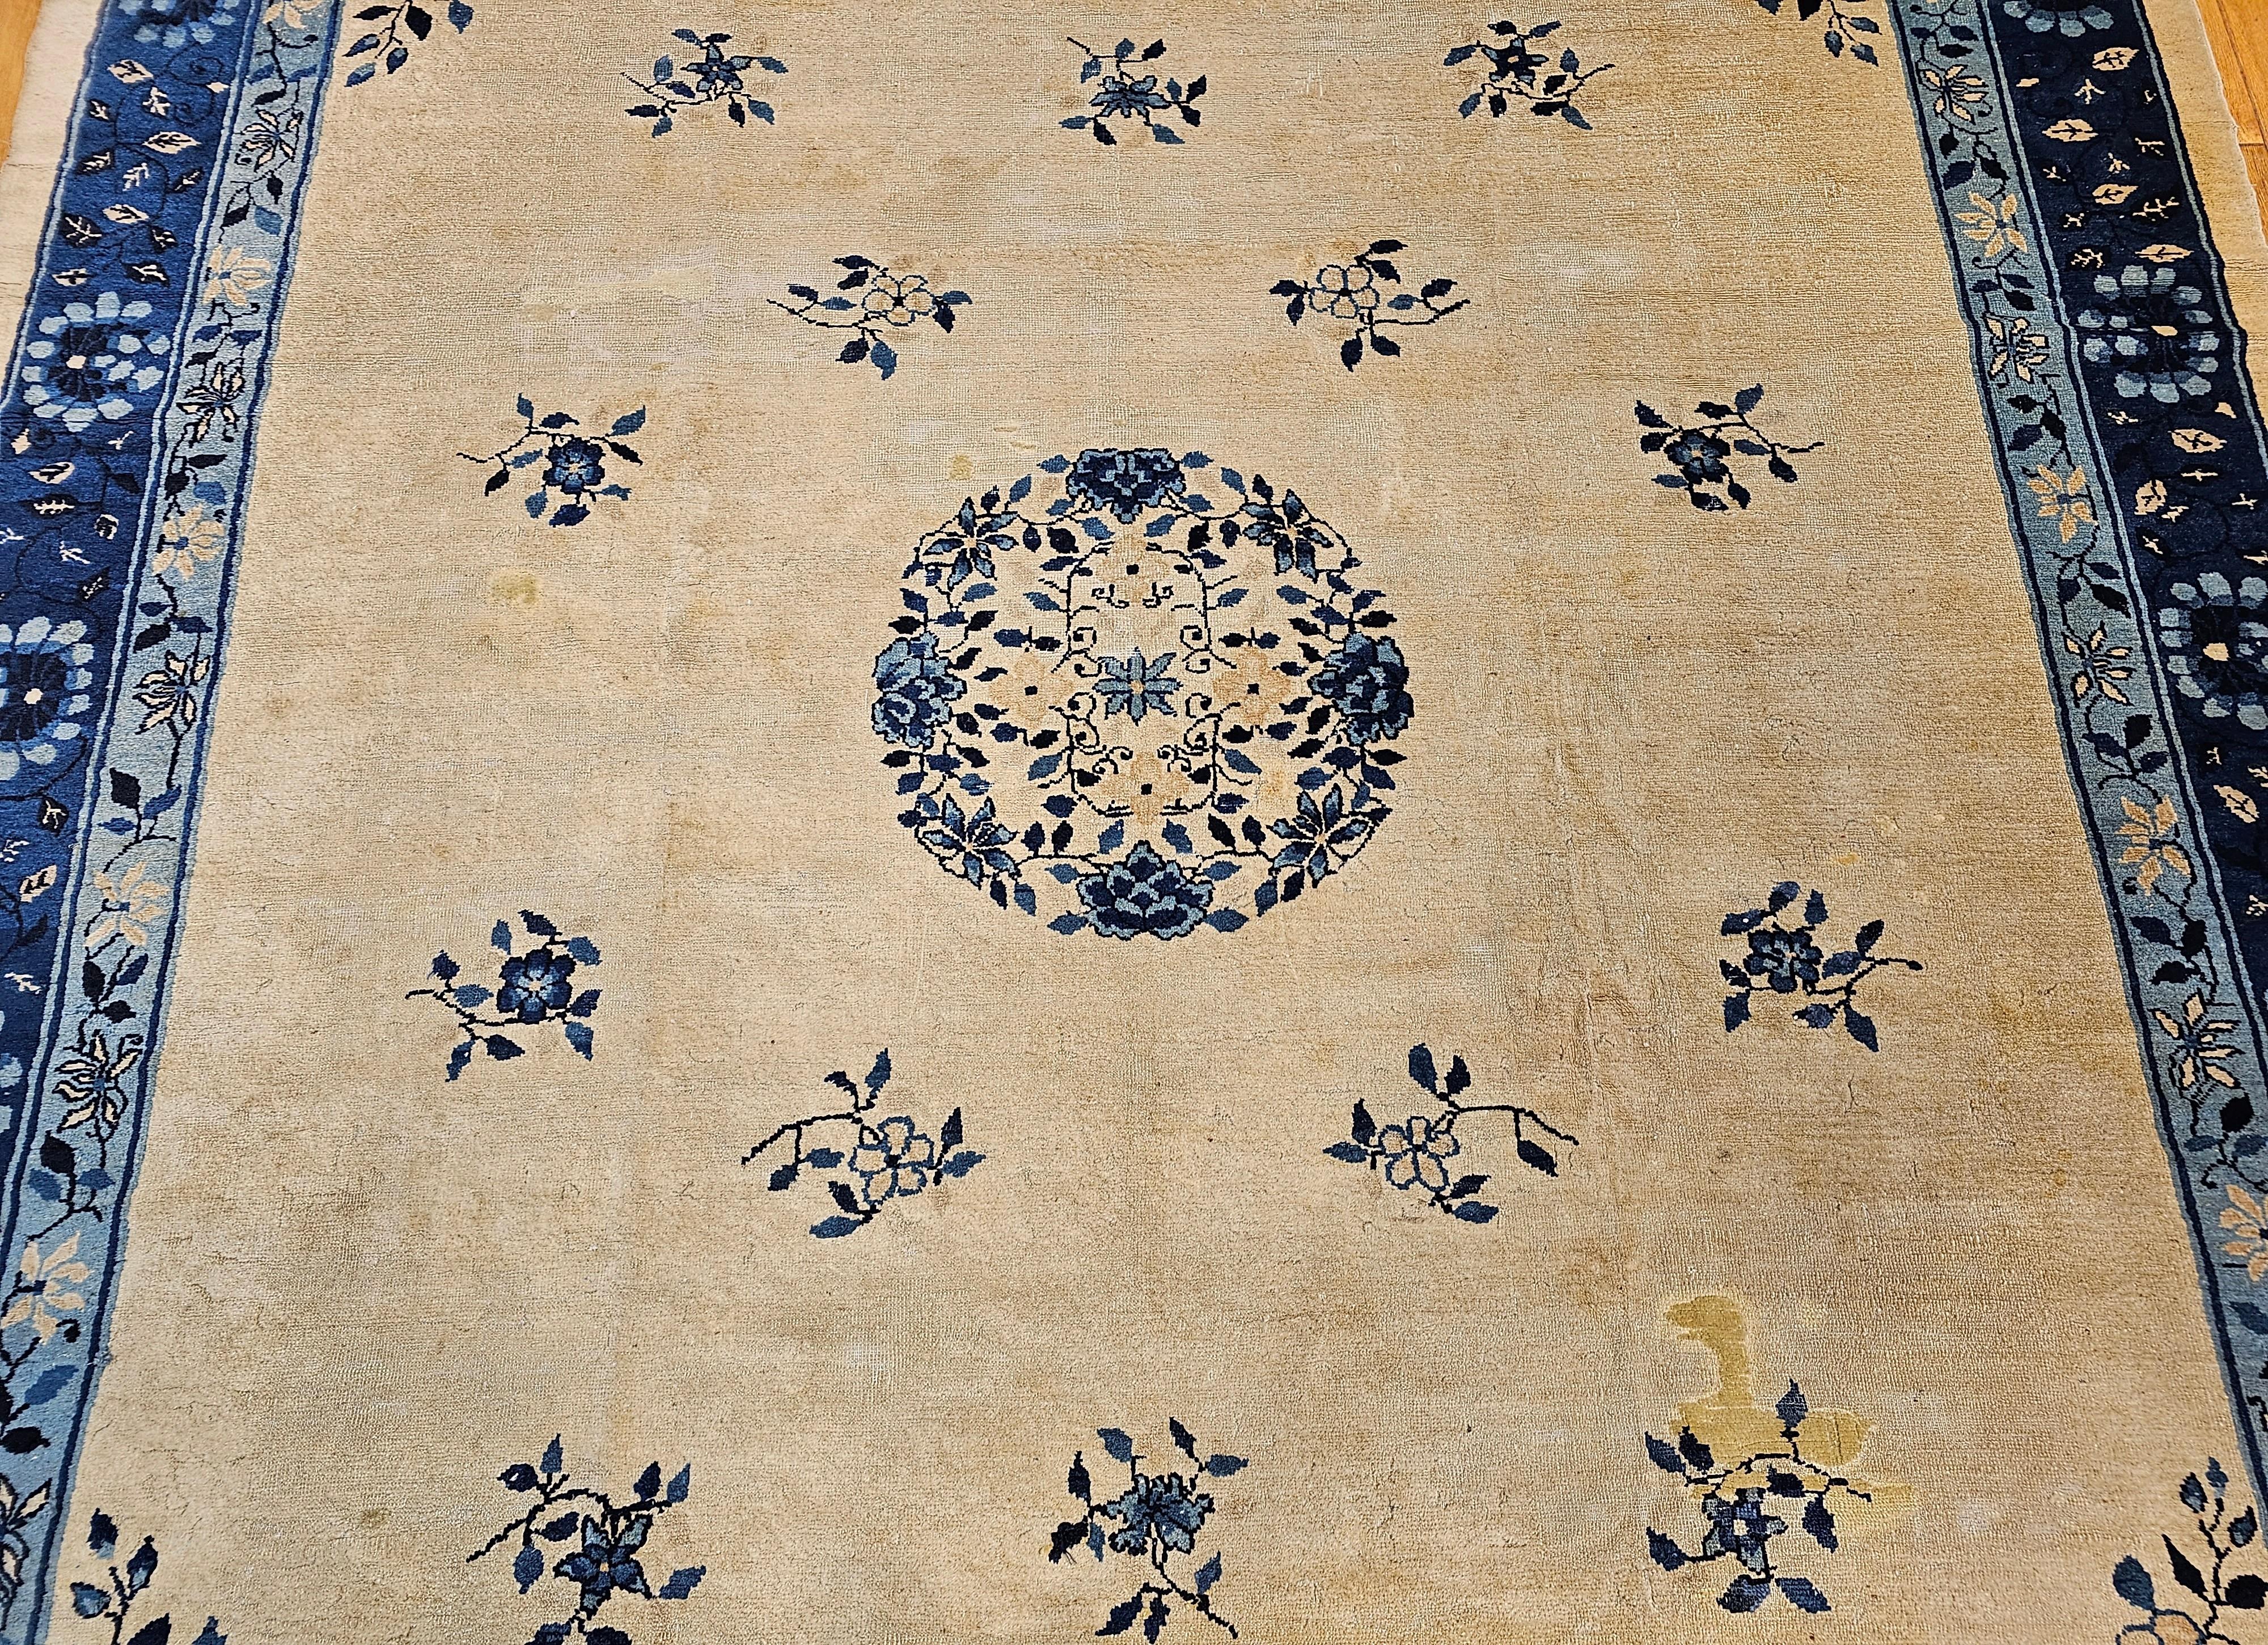 19th Century Room Size Chinese Peking Rug in Ivory, Navy, Baby Blue In Good Condition For Sale In Barrington, IL